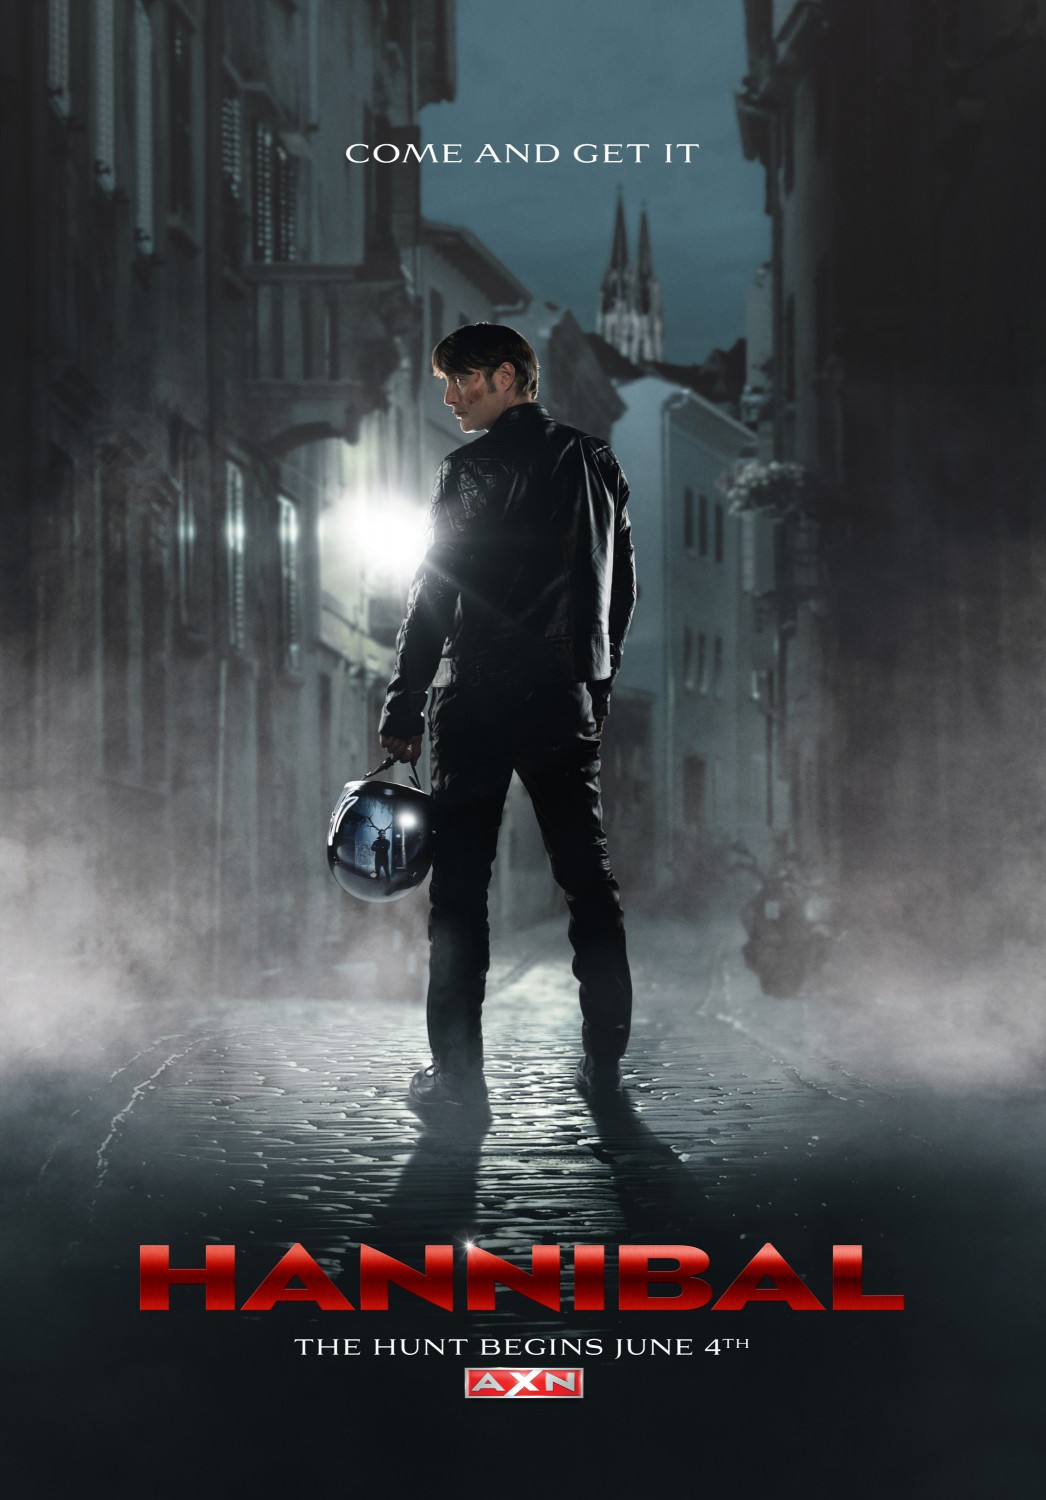 Extra Large TV Poster Image for Hannibal (#10 of 12)